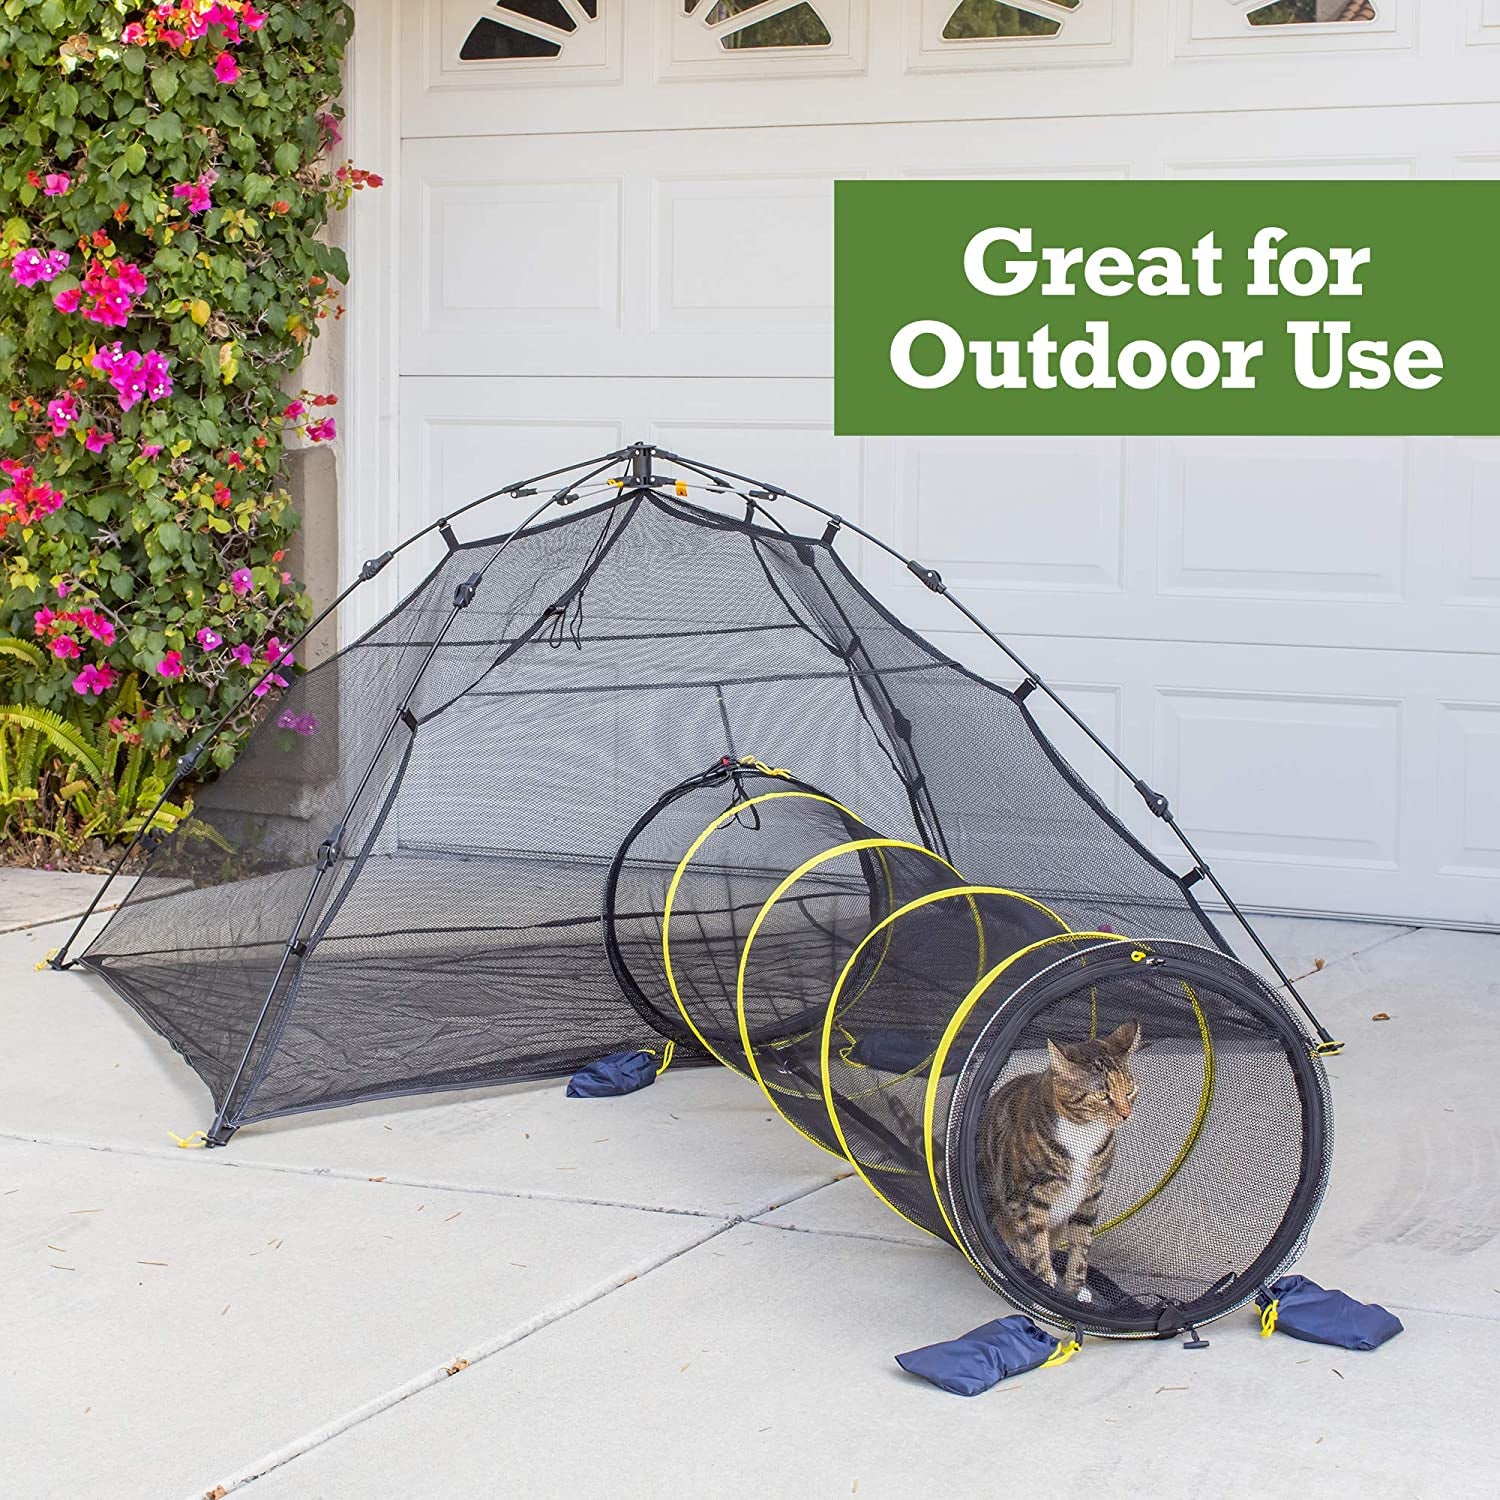 Outdoor Cat Enclosures for Indoor Cats [Portable Cat Tent, Cat Tunnel, and Playhouse] (Play Tents for Cats and Small Animals)